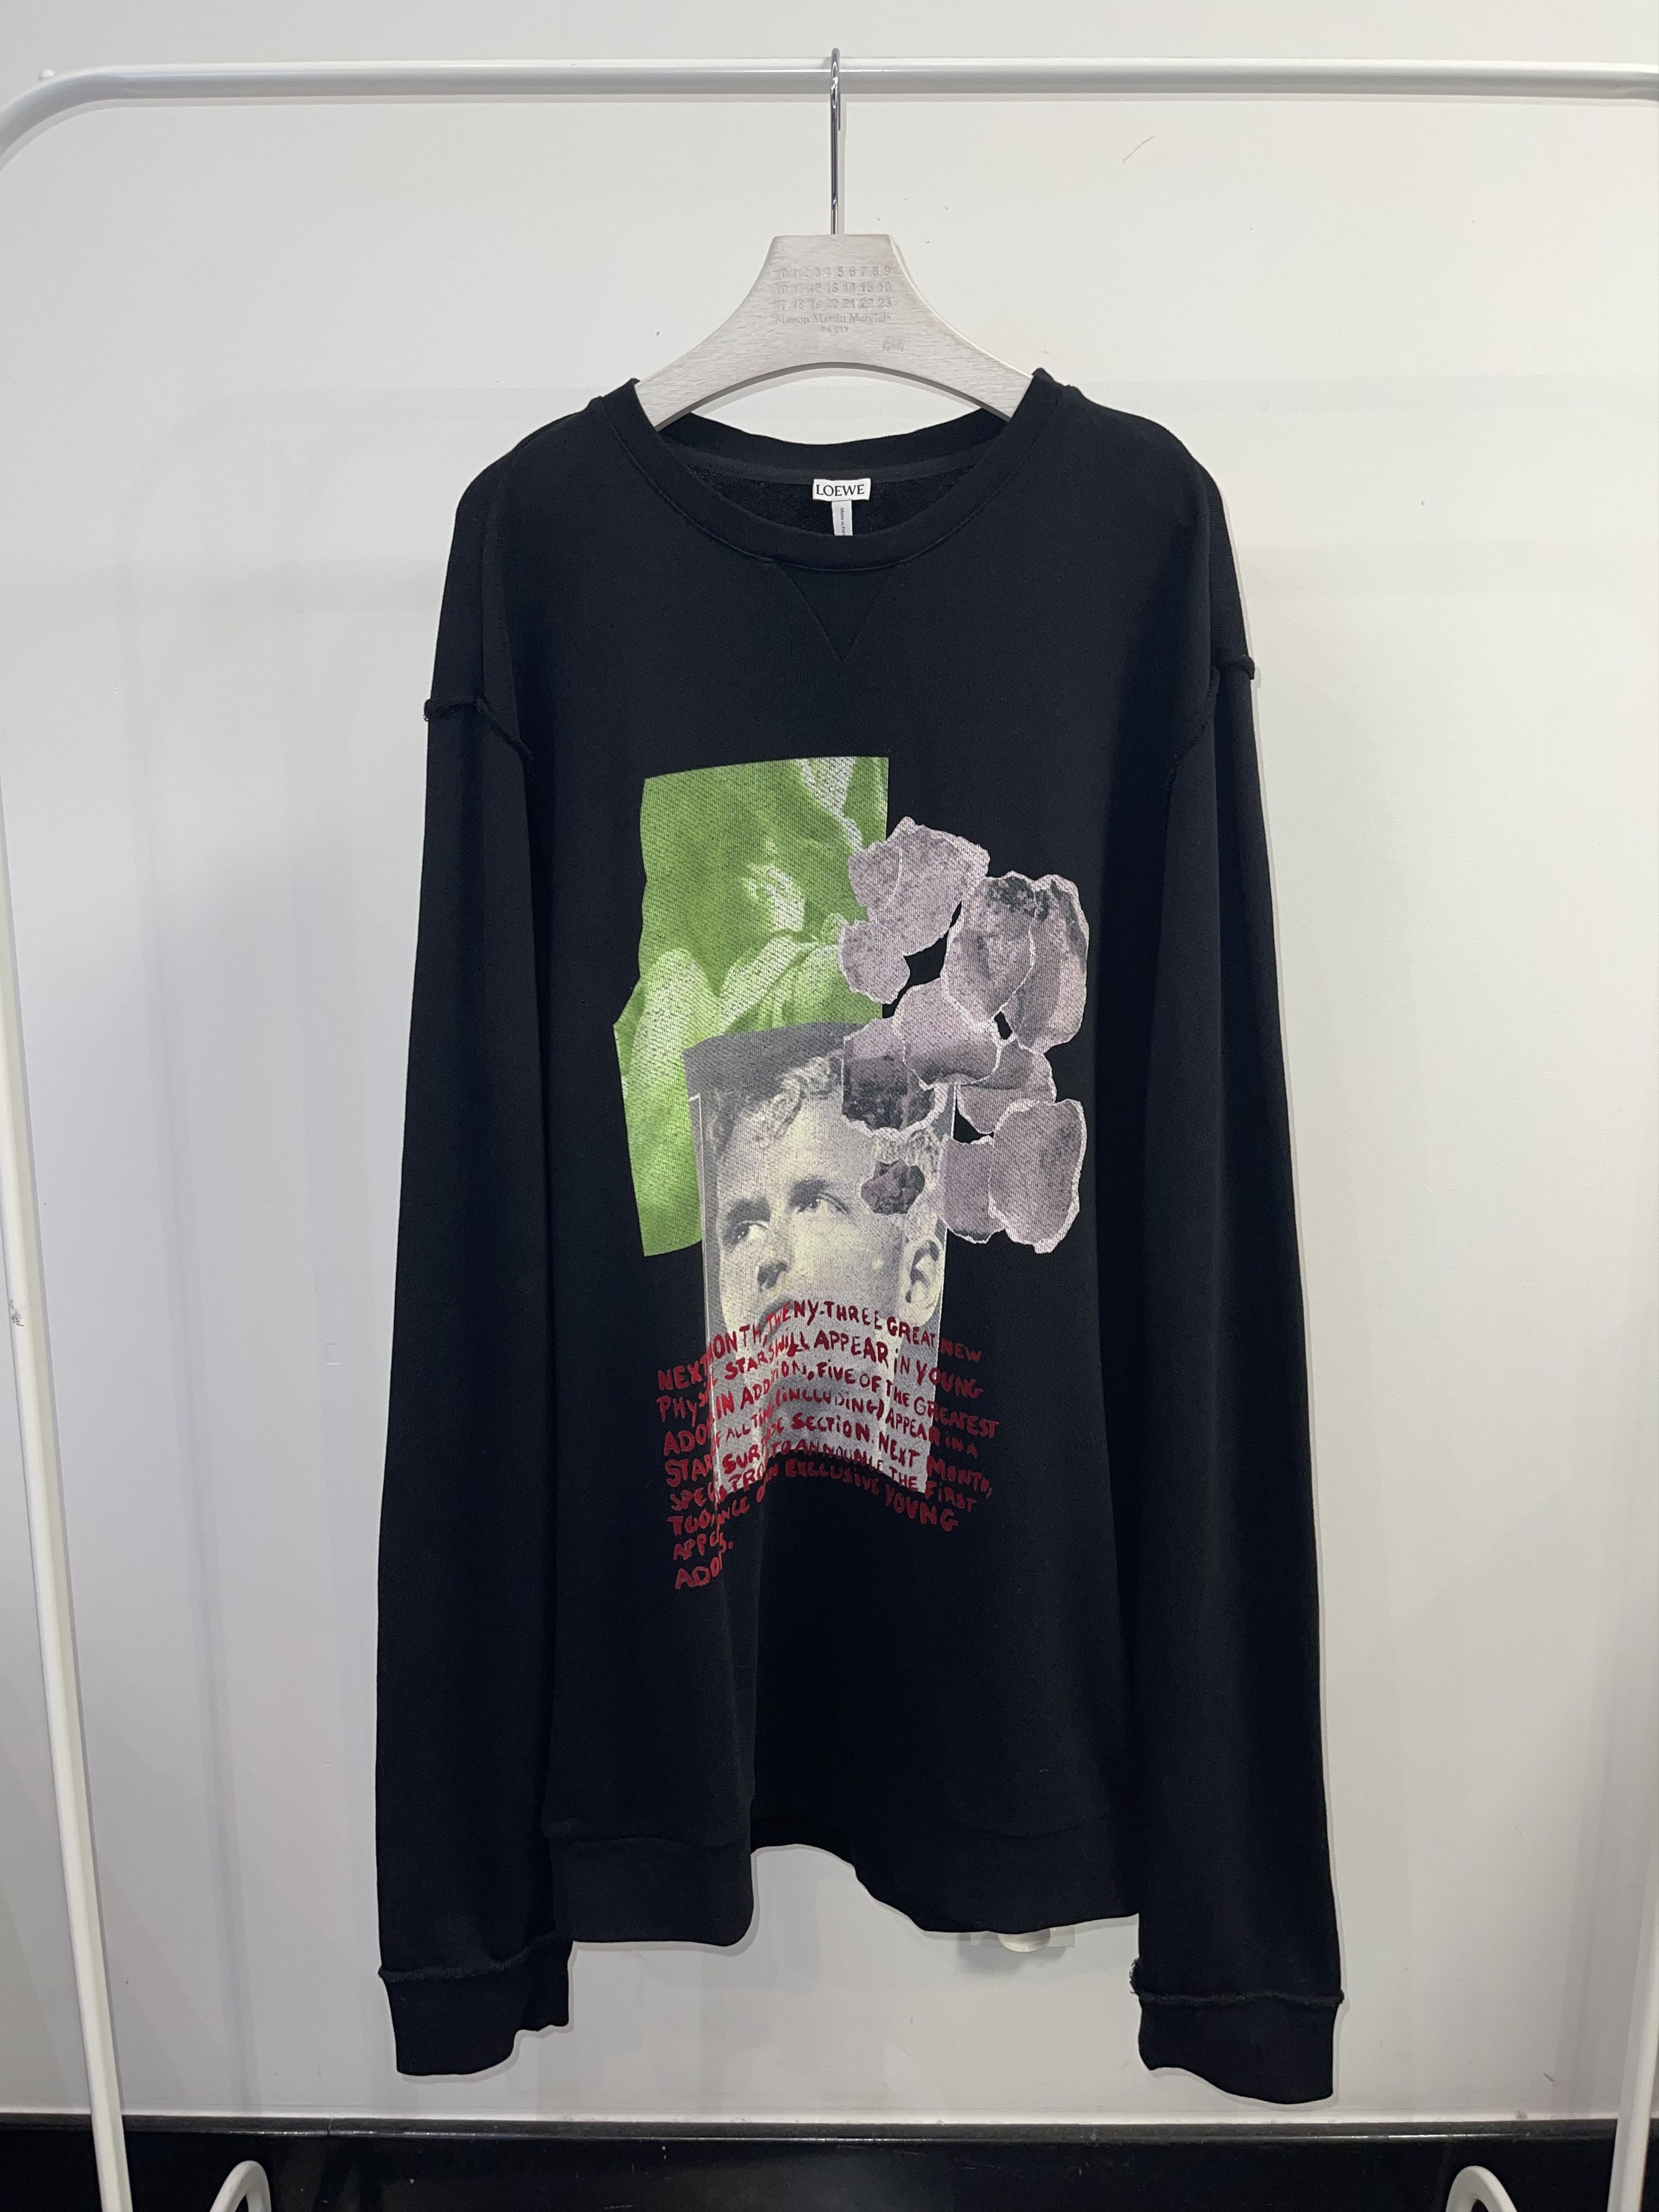 Loewe Loeve Adonis Abstract Inside Out Crewneck | Grailed